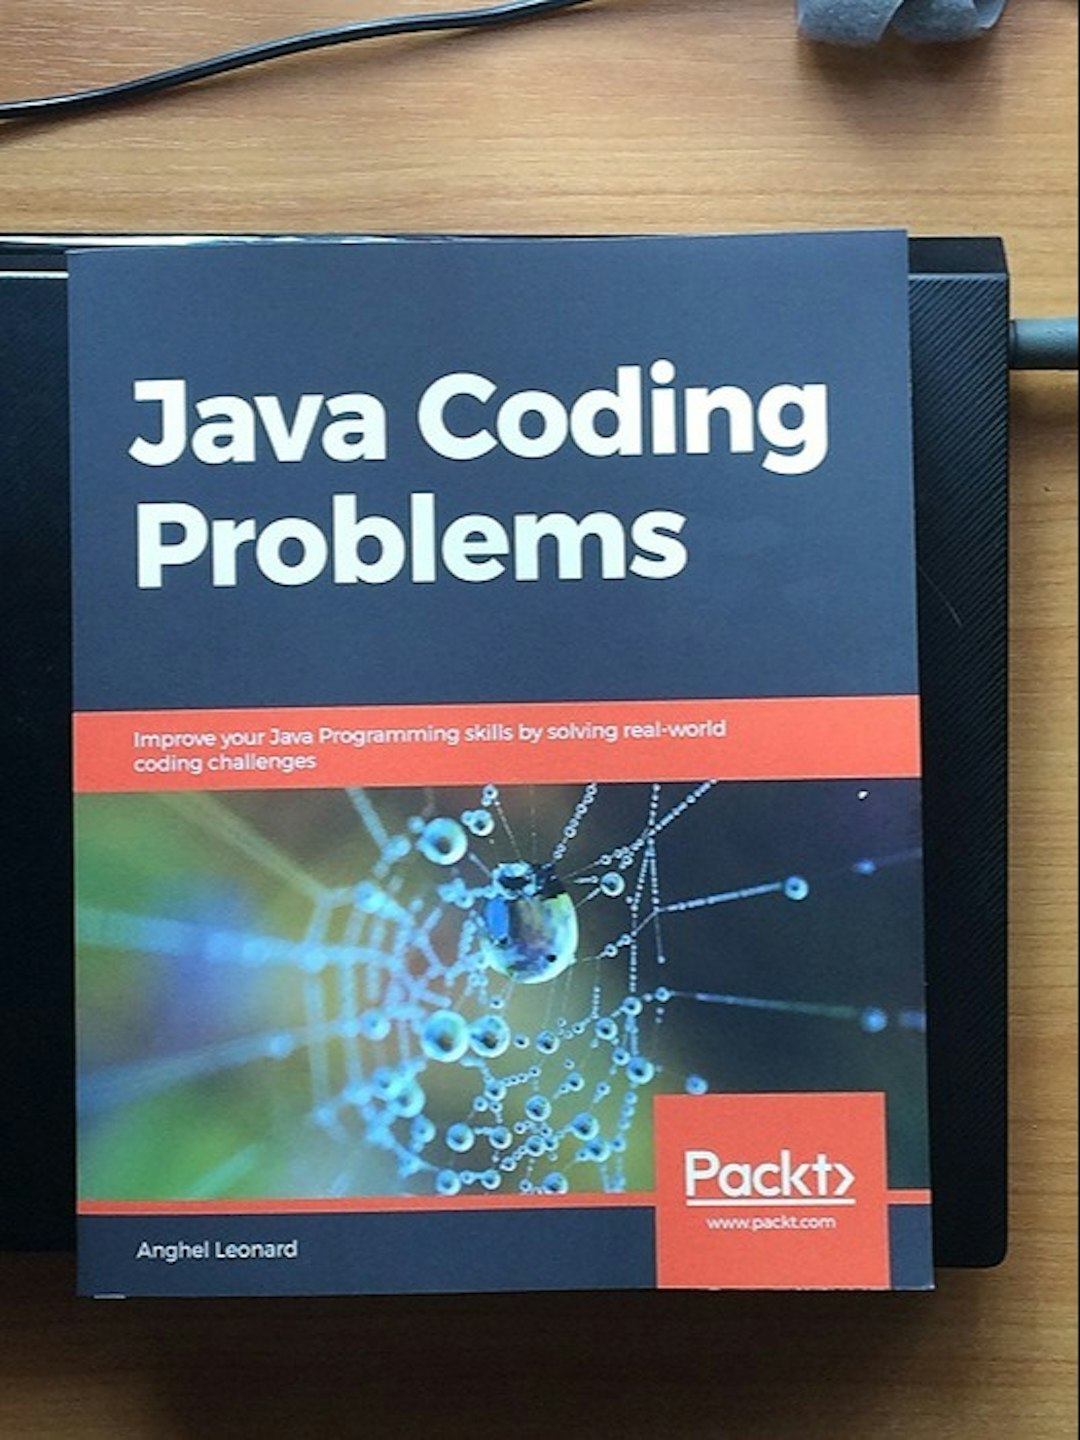 featured image - Java Coding Problems Review